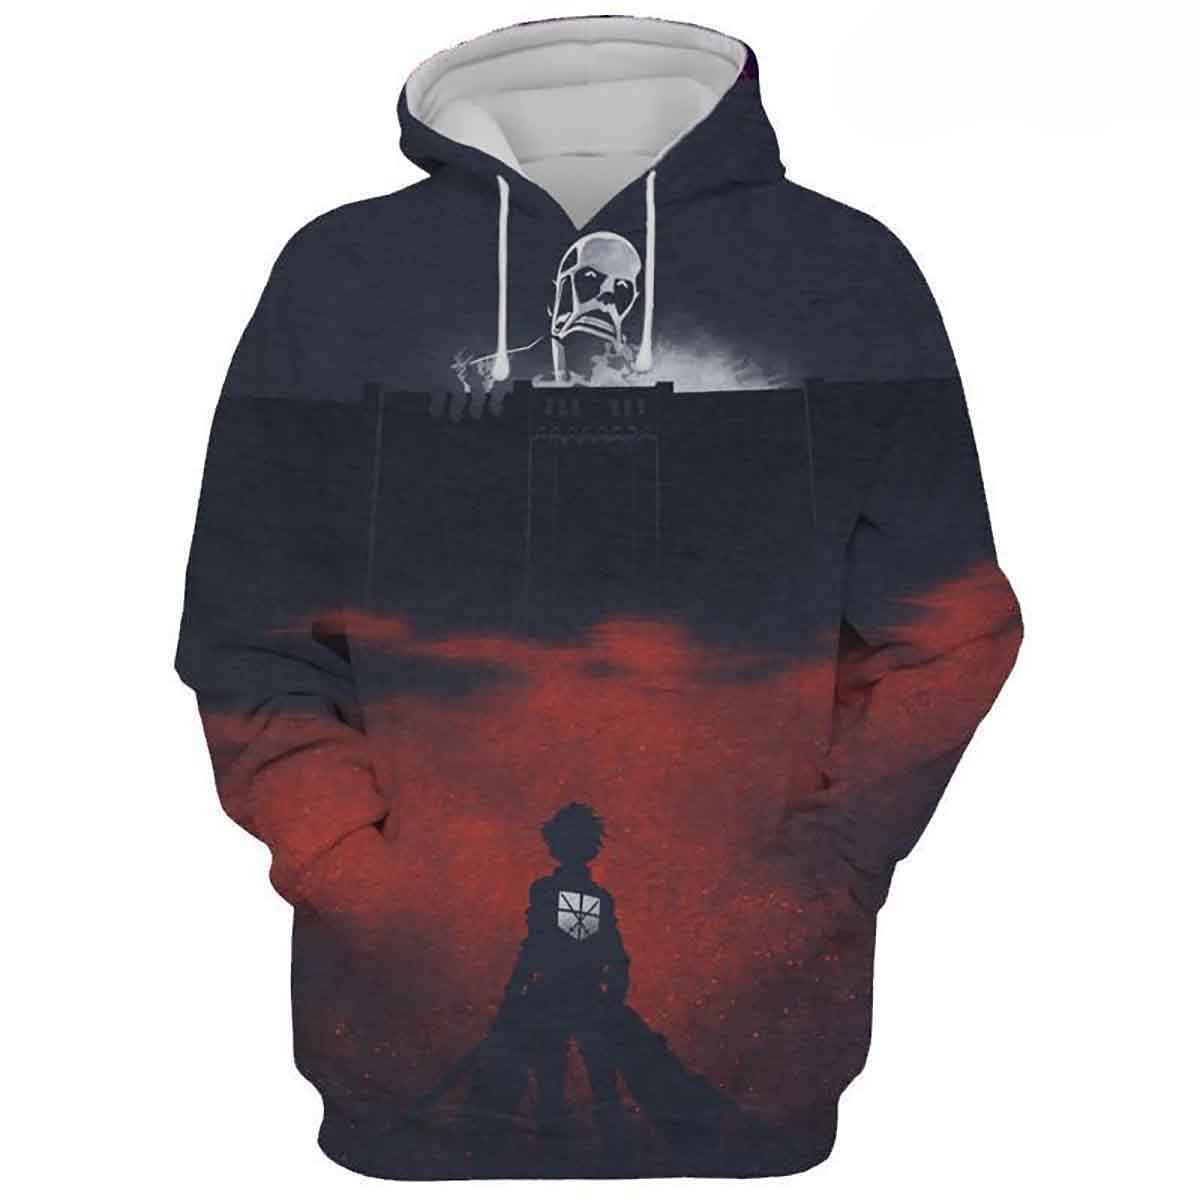 Colossal Titan Attack On Titan Vol. 1 - Attack On Titan Graphic Anime Hd 3d Aop Hoodie